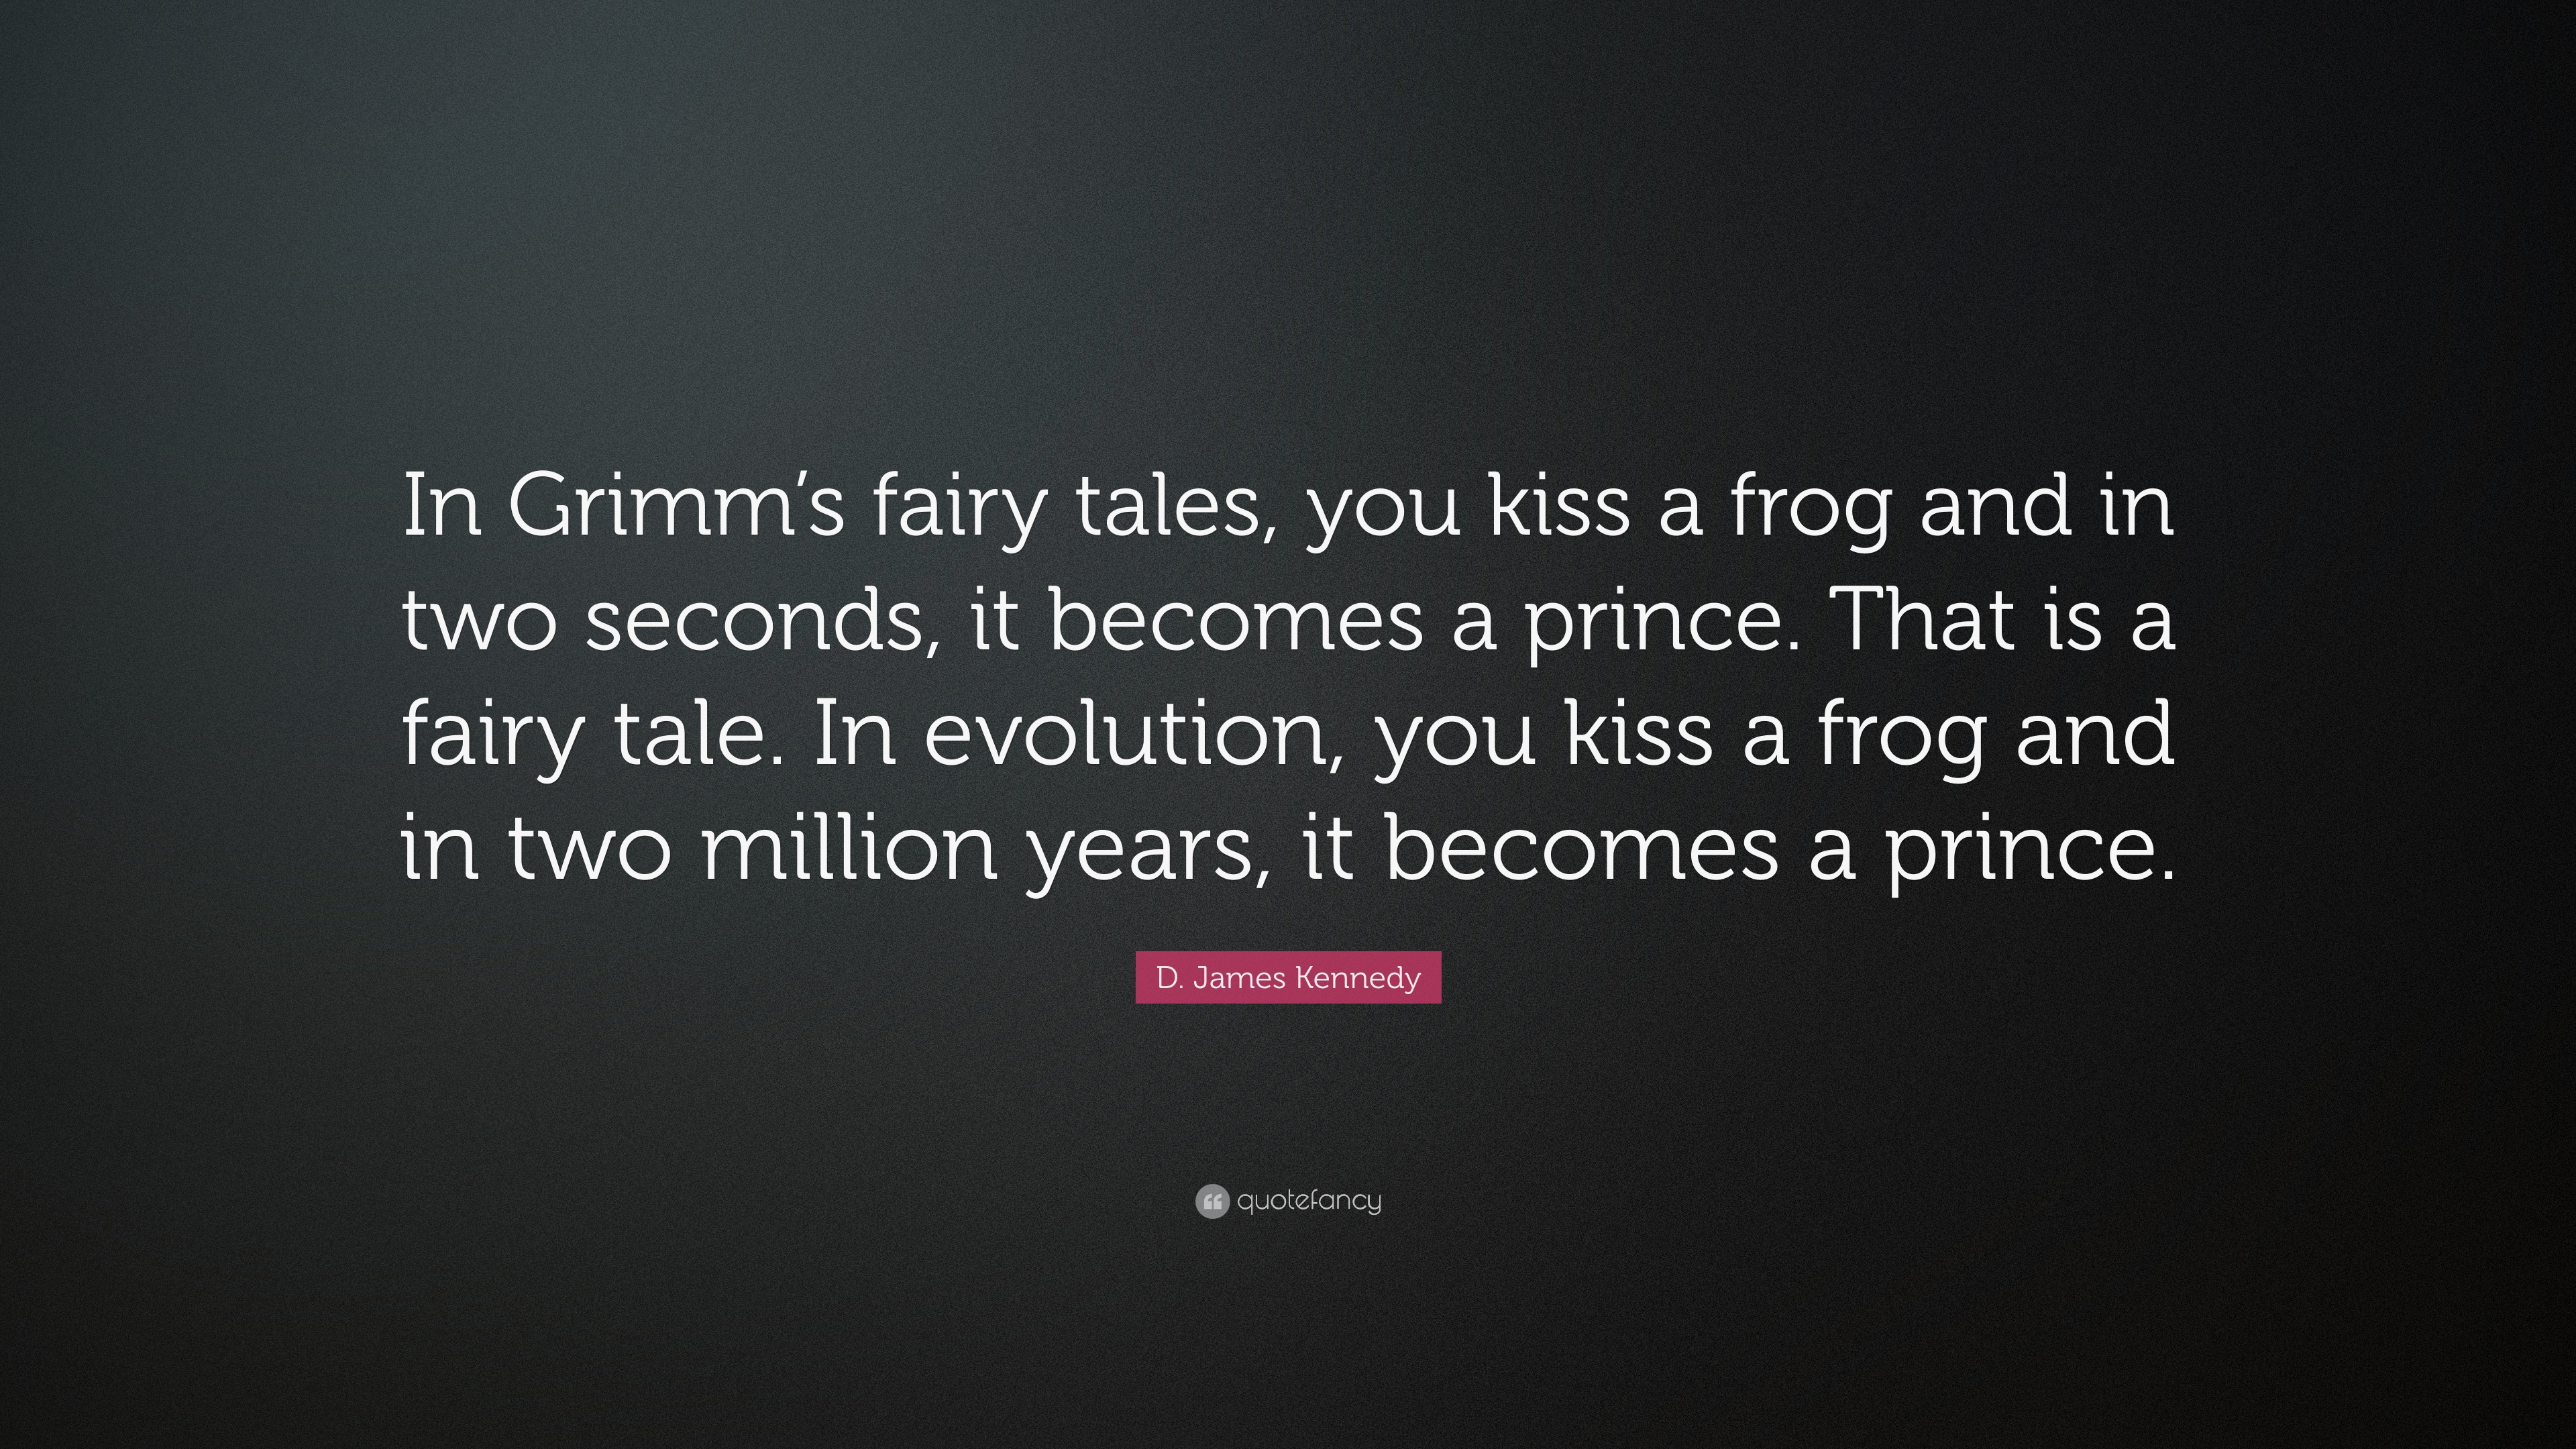 In Grimm’s fairy tales, you kiss a frog and in two seconds, it becomes a prince. That is a fairy tale. In evolution, you kiss a frog and in two million years, it becomes a prince.